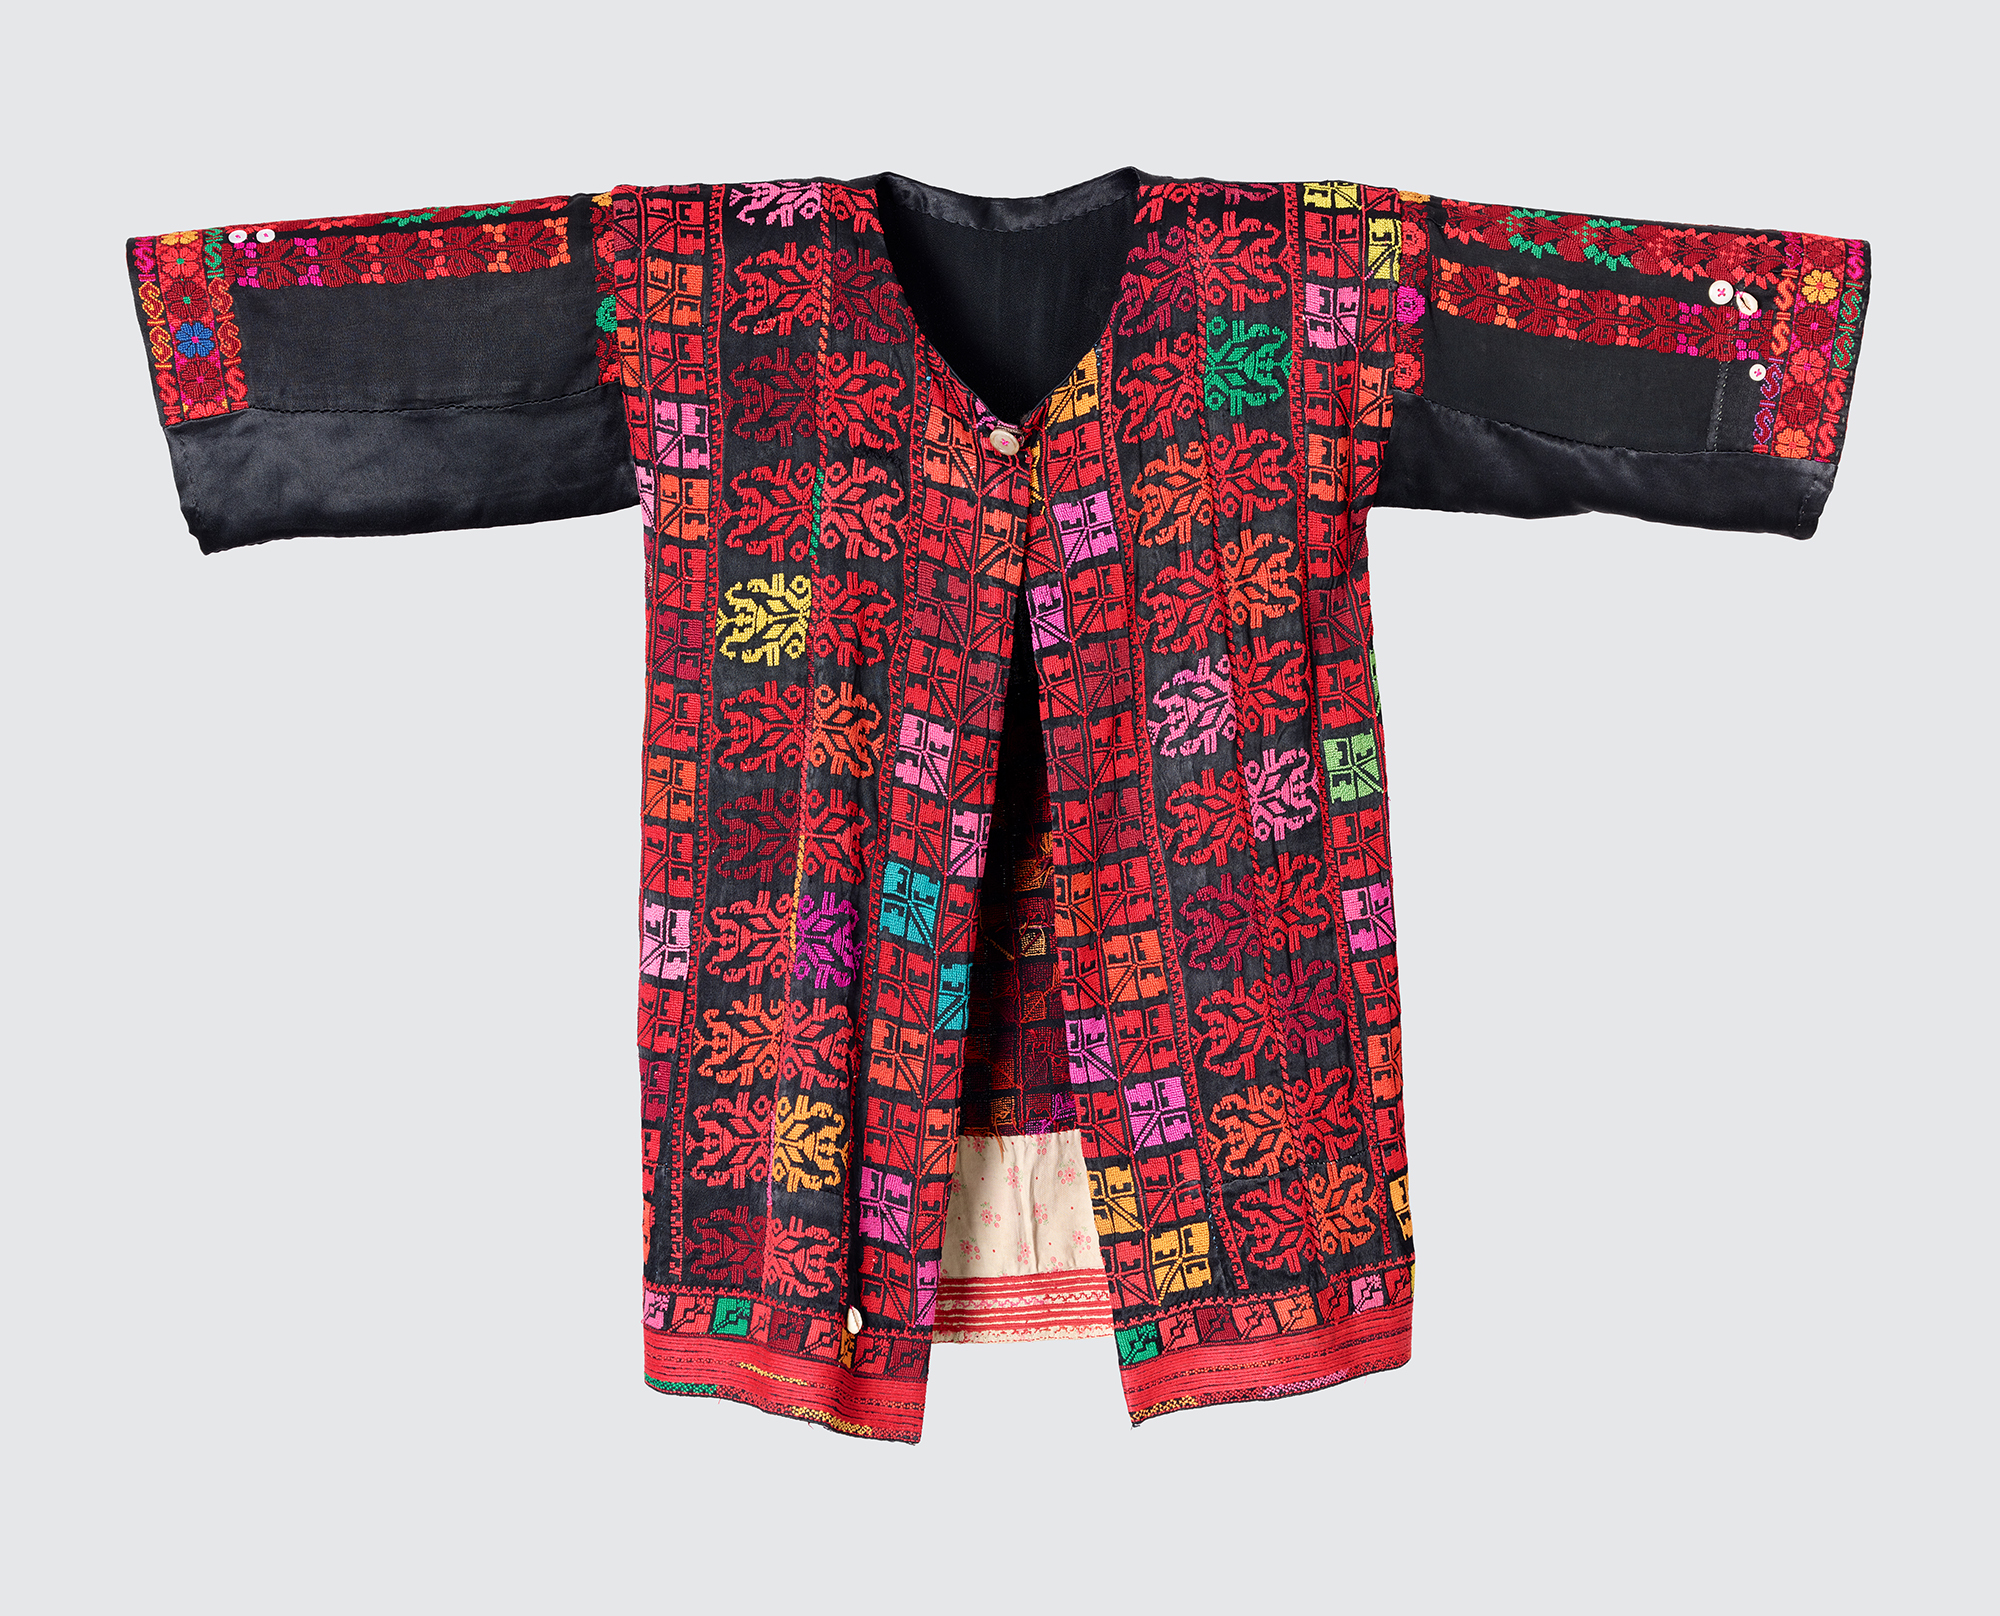 Jacket for a married woman with embroidery in shades of red, the color of fertility and sexuality, made of a fine cotton-silk blend. Collected by Widad Kamel Kawar in the Suf Refugee Camp (Jordan), 1996. Region of origin: Negev, 1950s.